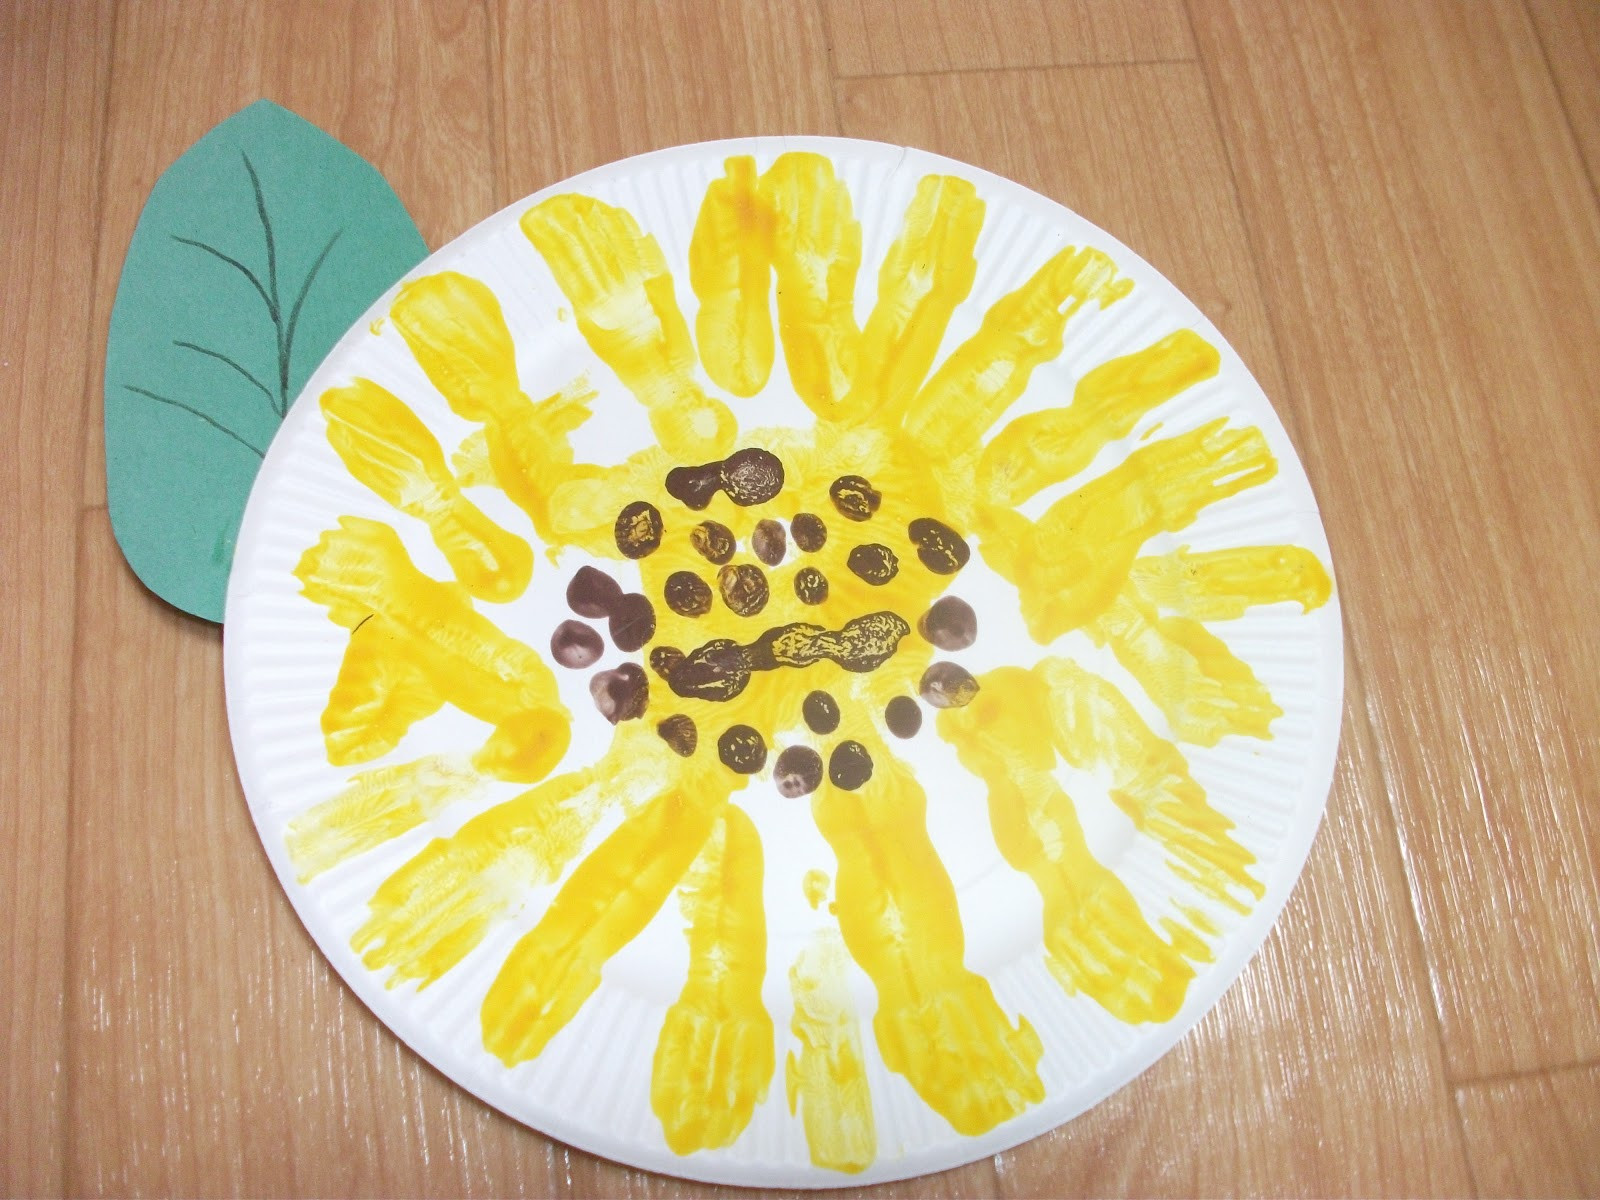 Simple Crafts For Preschoolers
 Preschool Crafts for Kids Easy Paper Plate Sunflower Craft